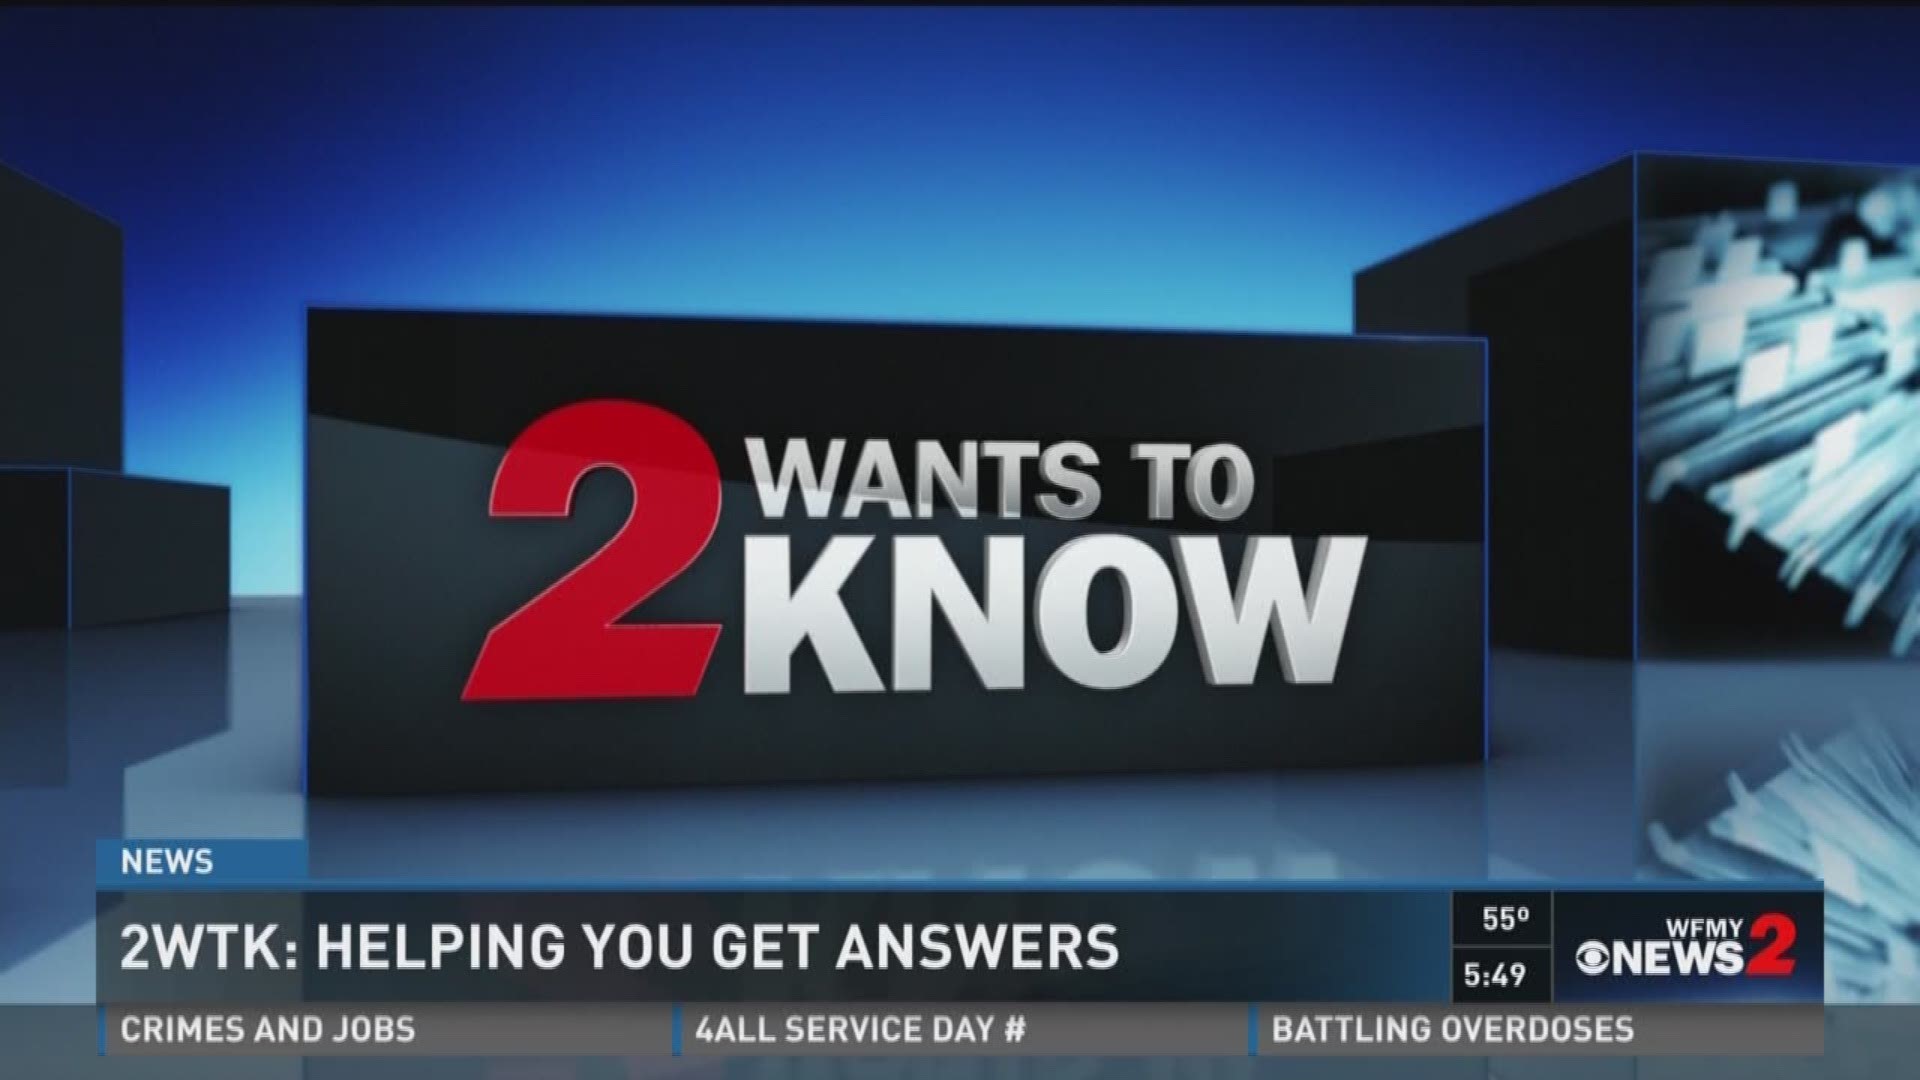 2WTK: Helping You Get Answers